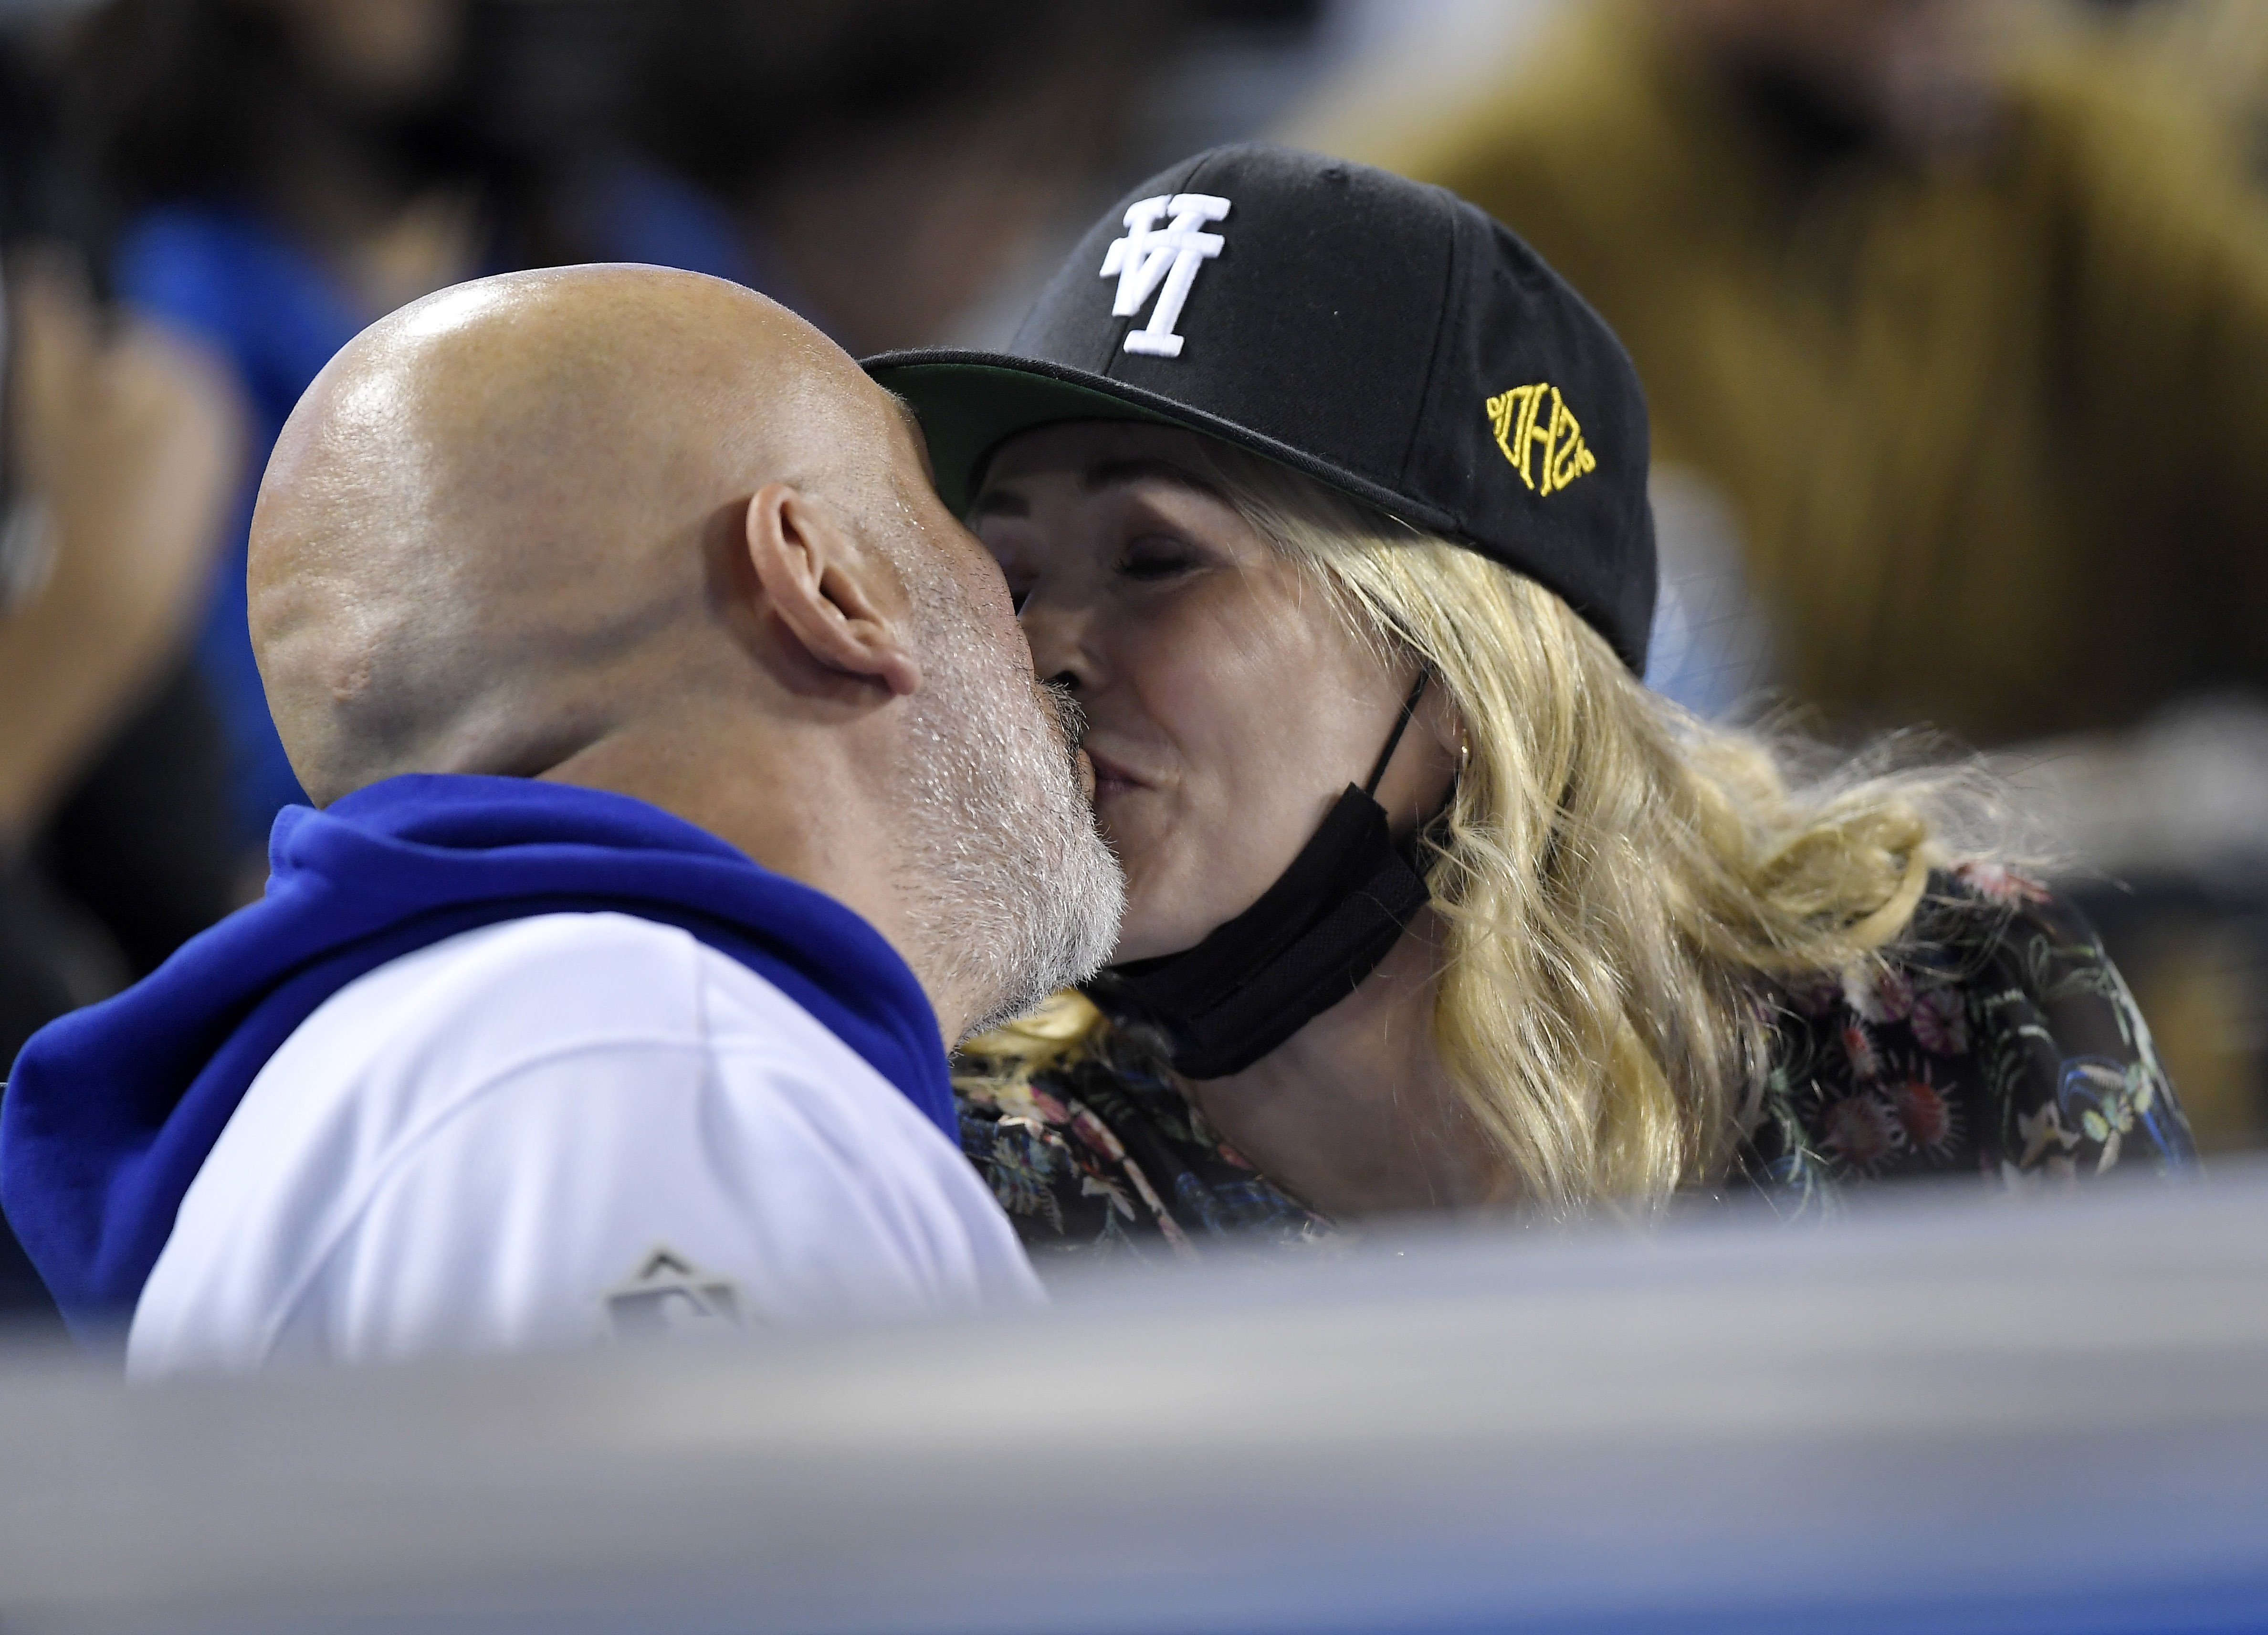 Chelsea Handler and Jo Koy at the game between the San Diego Padres and the Los Angeles Dodgers at Dodger Stadium, 2021 | Photo: Getty Images 